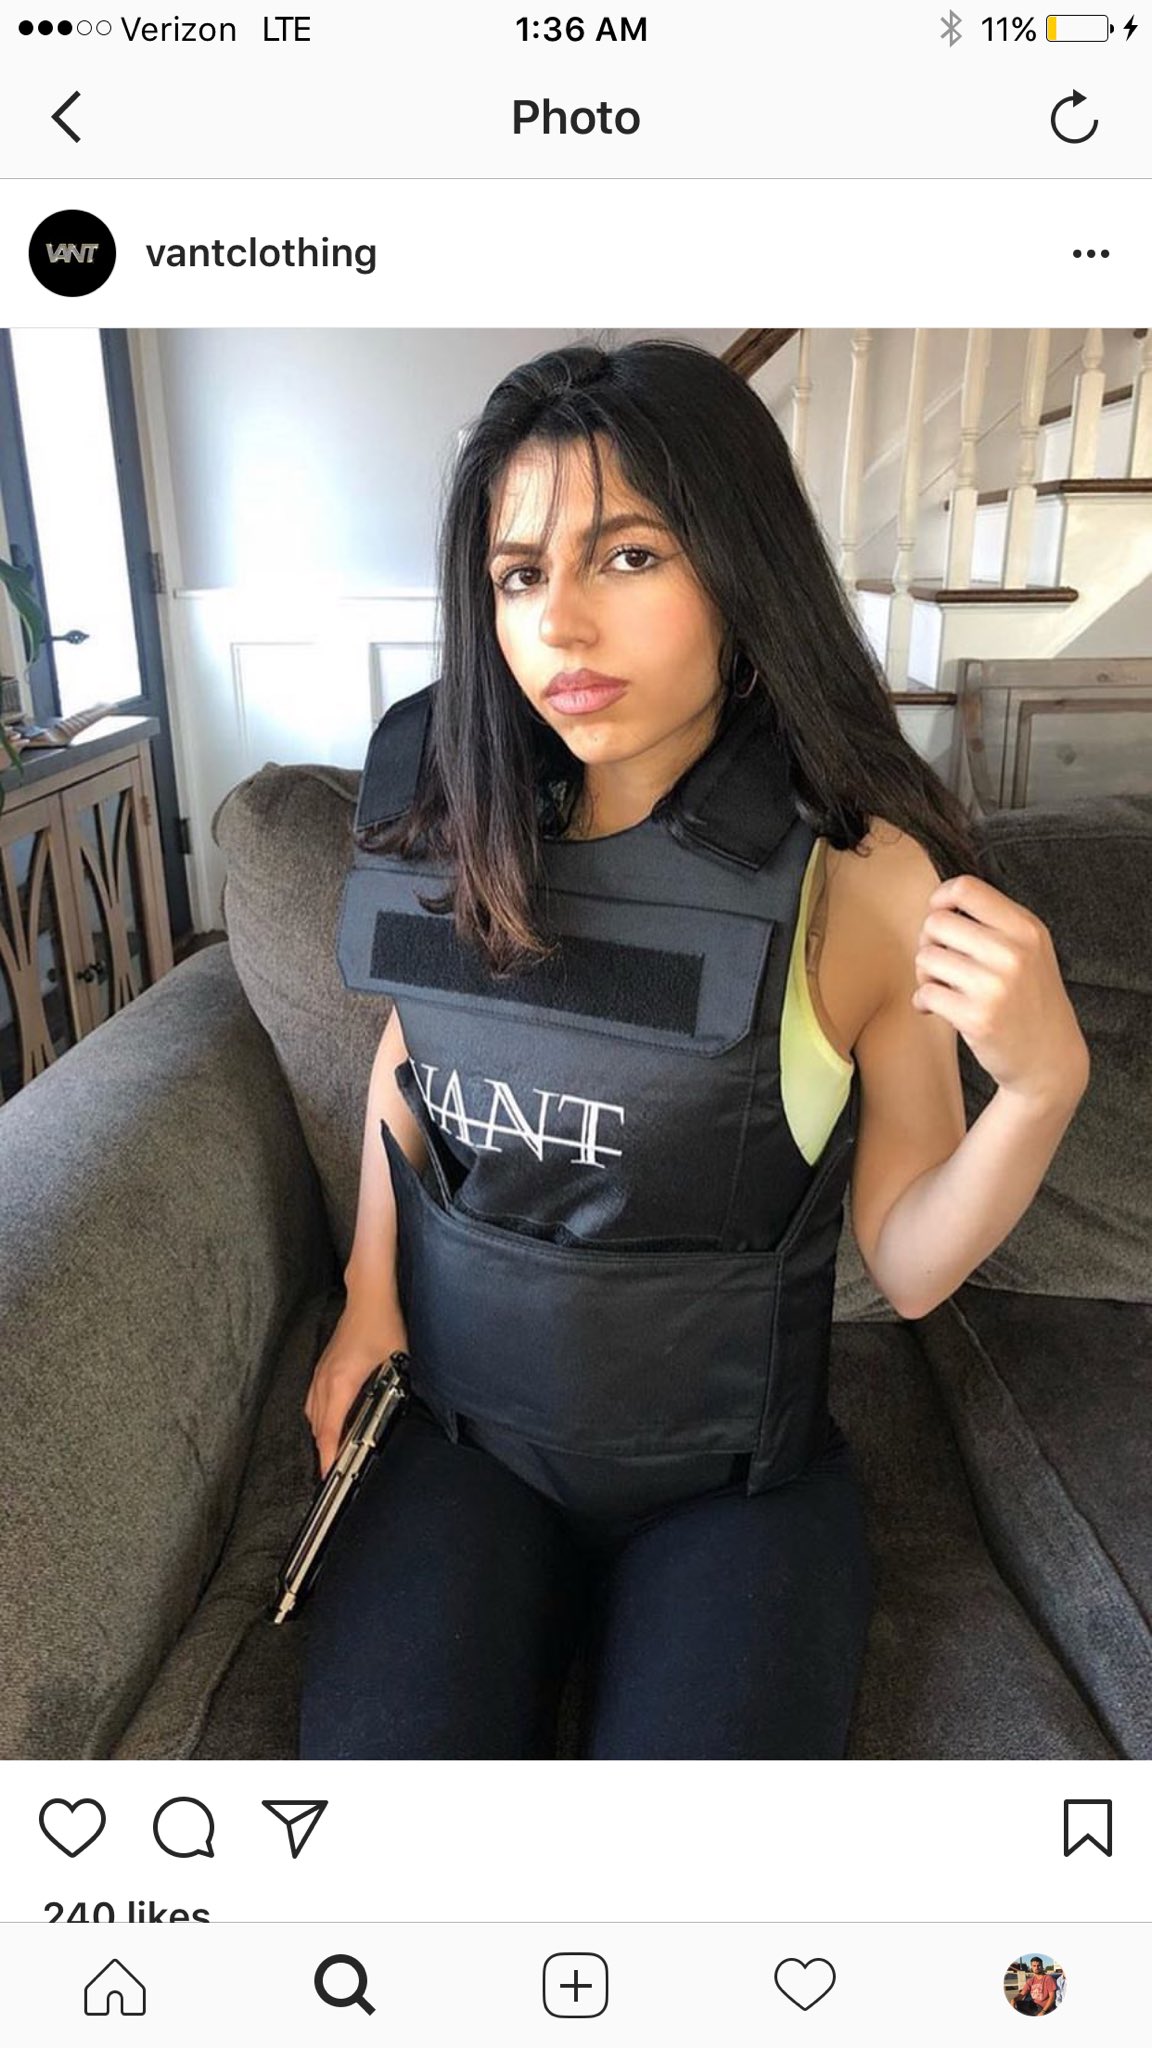 Tias on X: Just found out about 10 minutes ago that bulletproof vests is  the new fashion trend apparently  / X